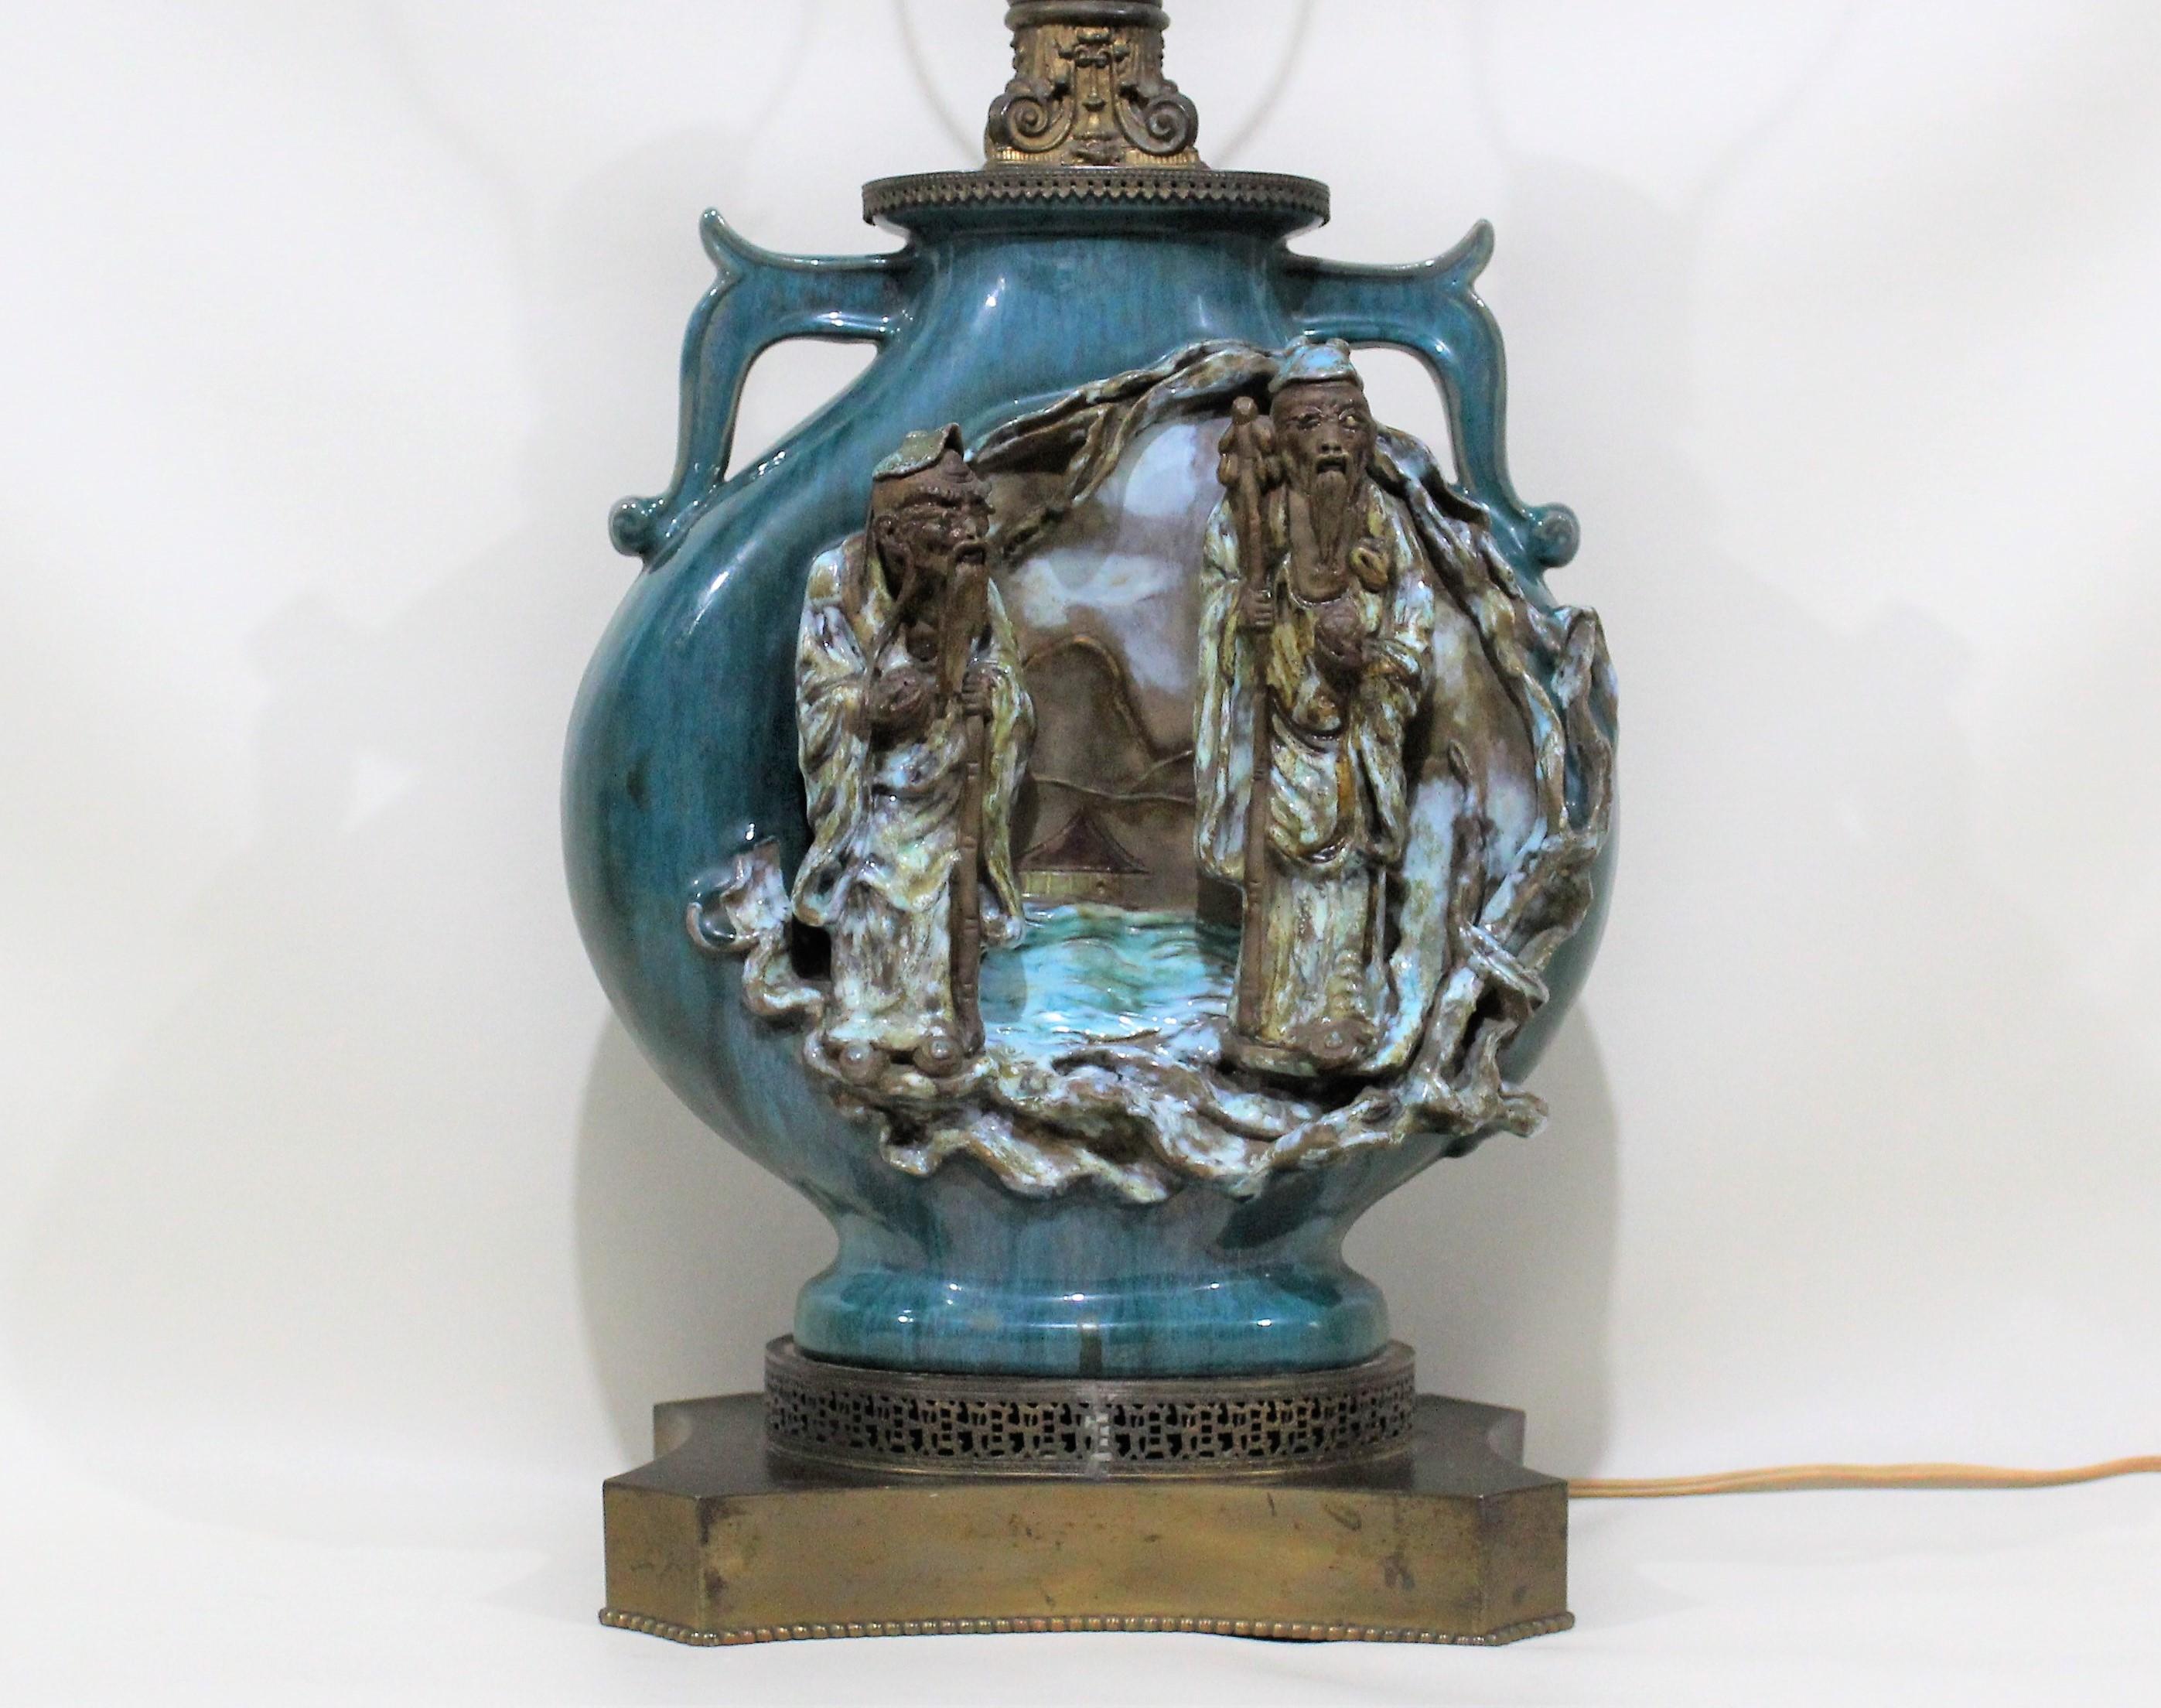 This hand sculptured, circa 1900 Chinese Shiwan pottery lamp depicts two Chinese scholars within a country landscape. Sometime in the mid-20th century the previous owner properly converted this large Shiwan pottery vase into a lamp. On the back are